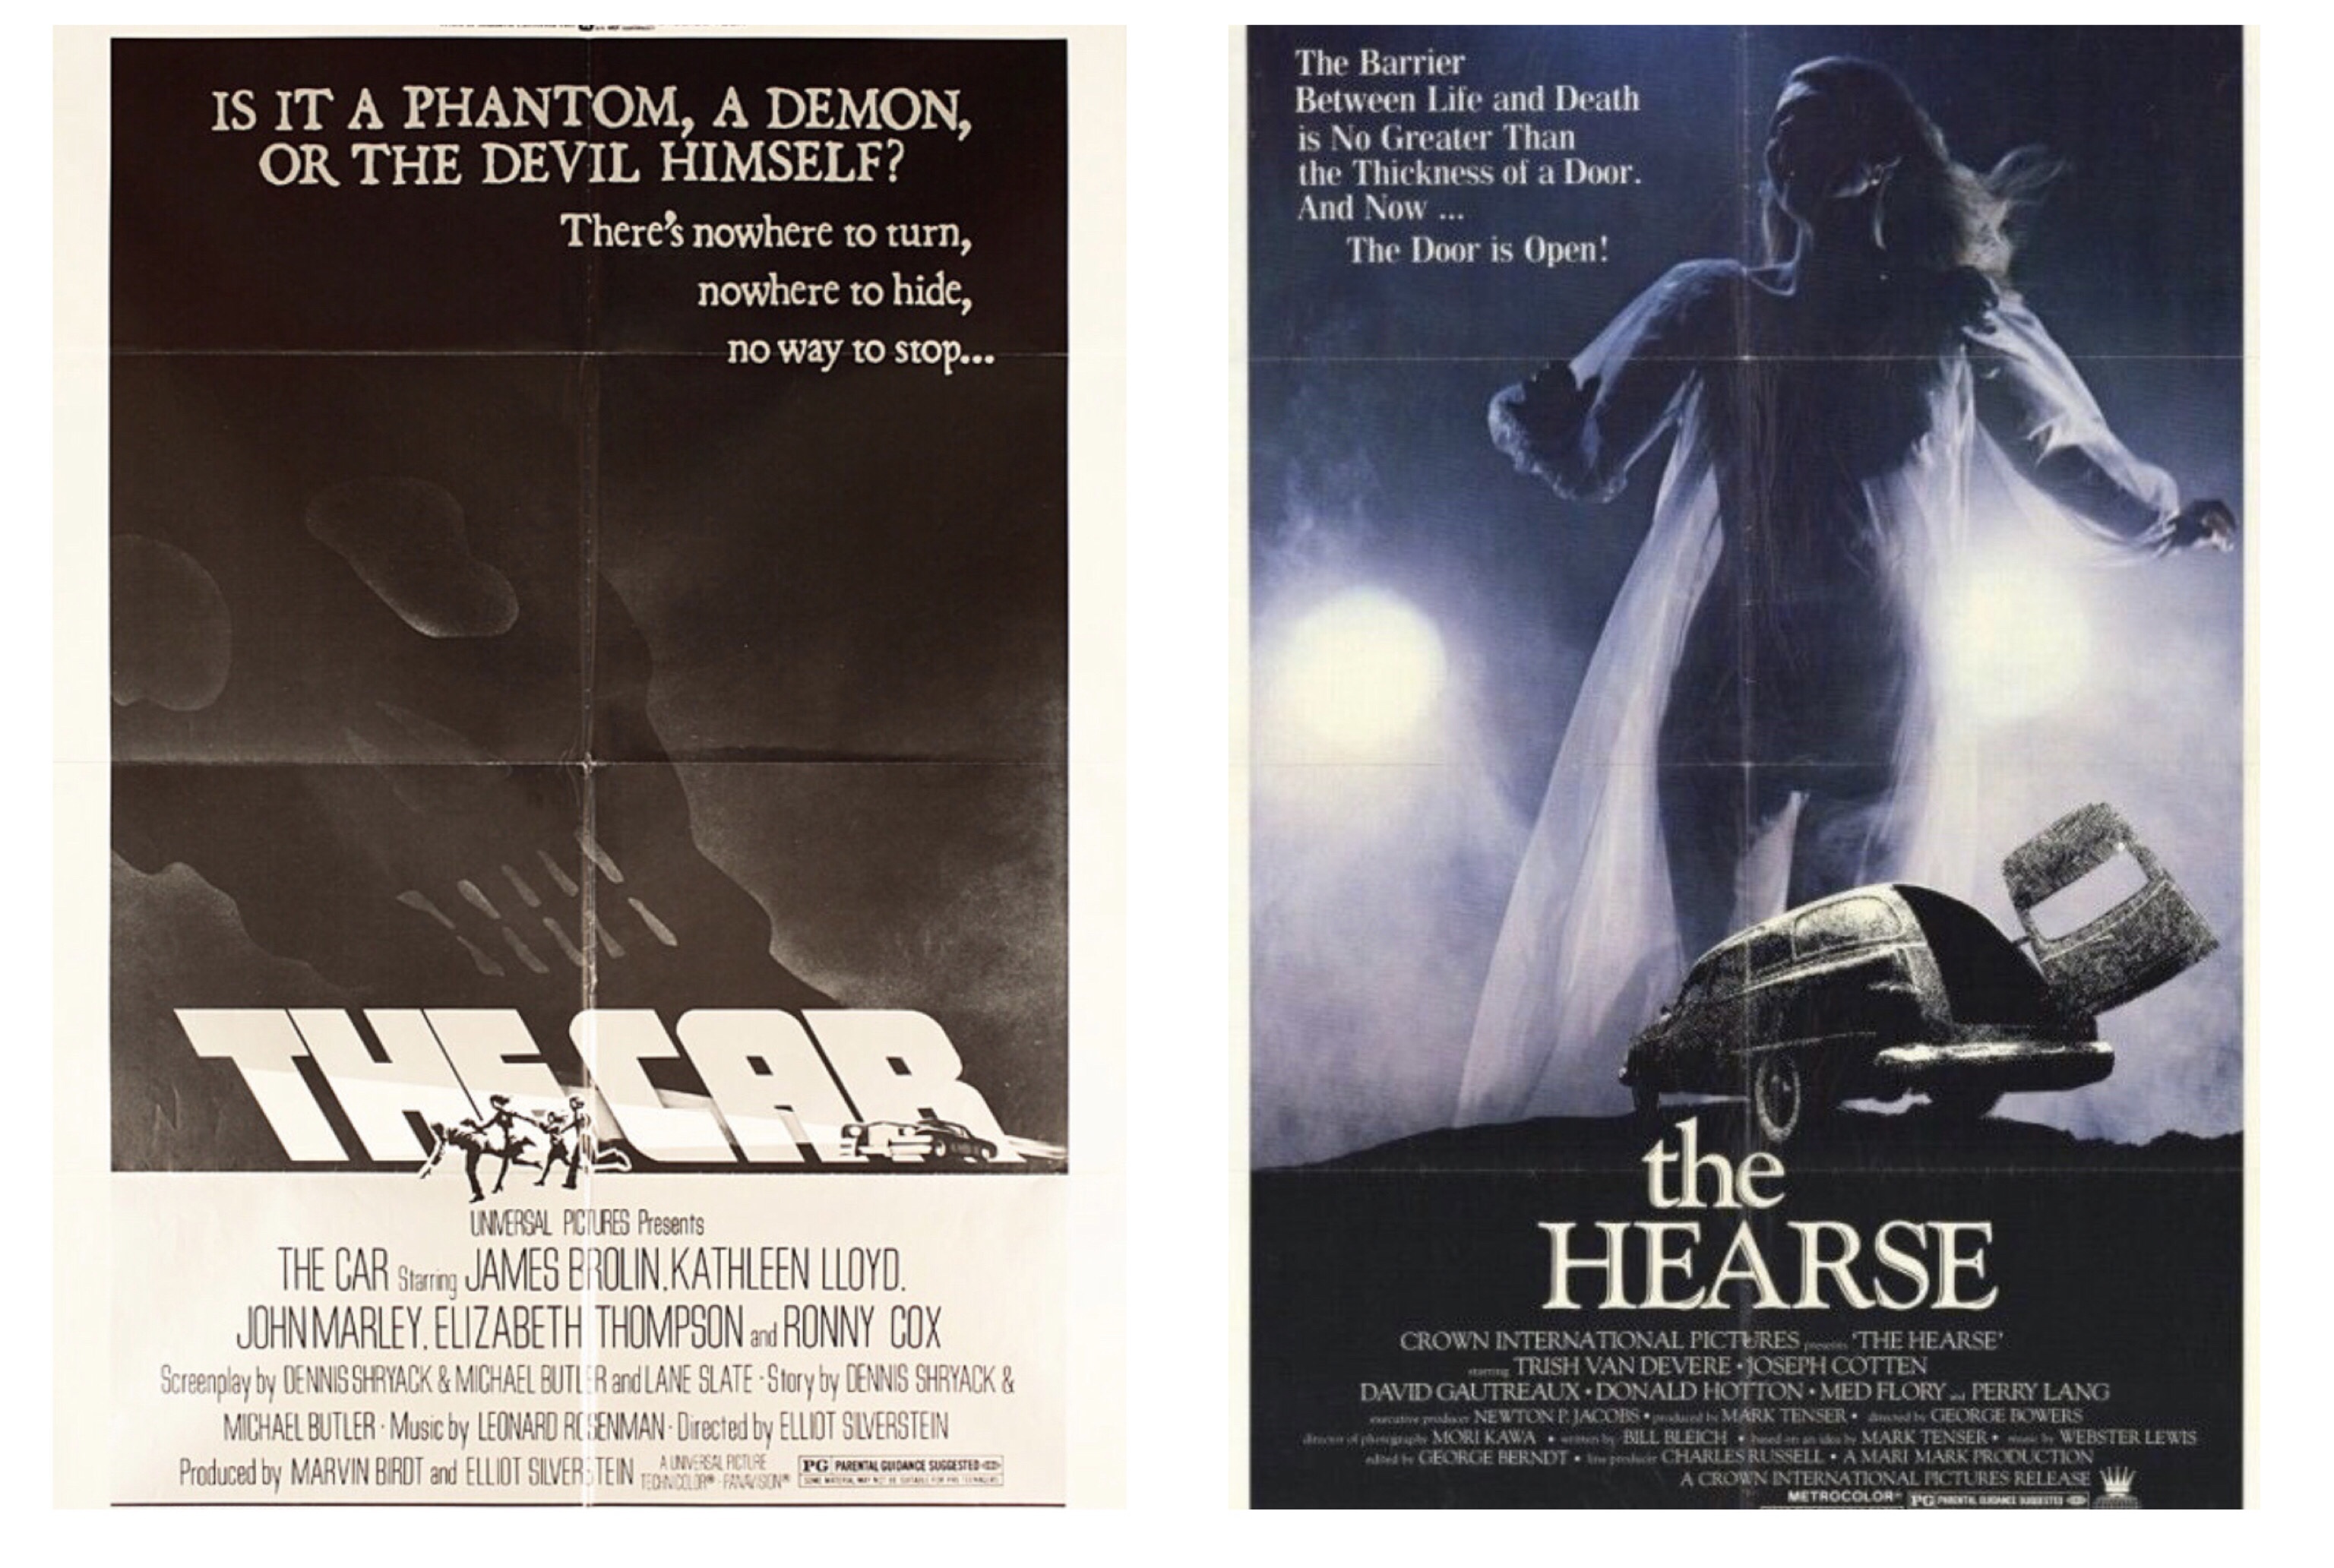 31 Days to Scare ~ Drive-In Double Feature: The Car (1977) & The Hearse (1980)